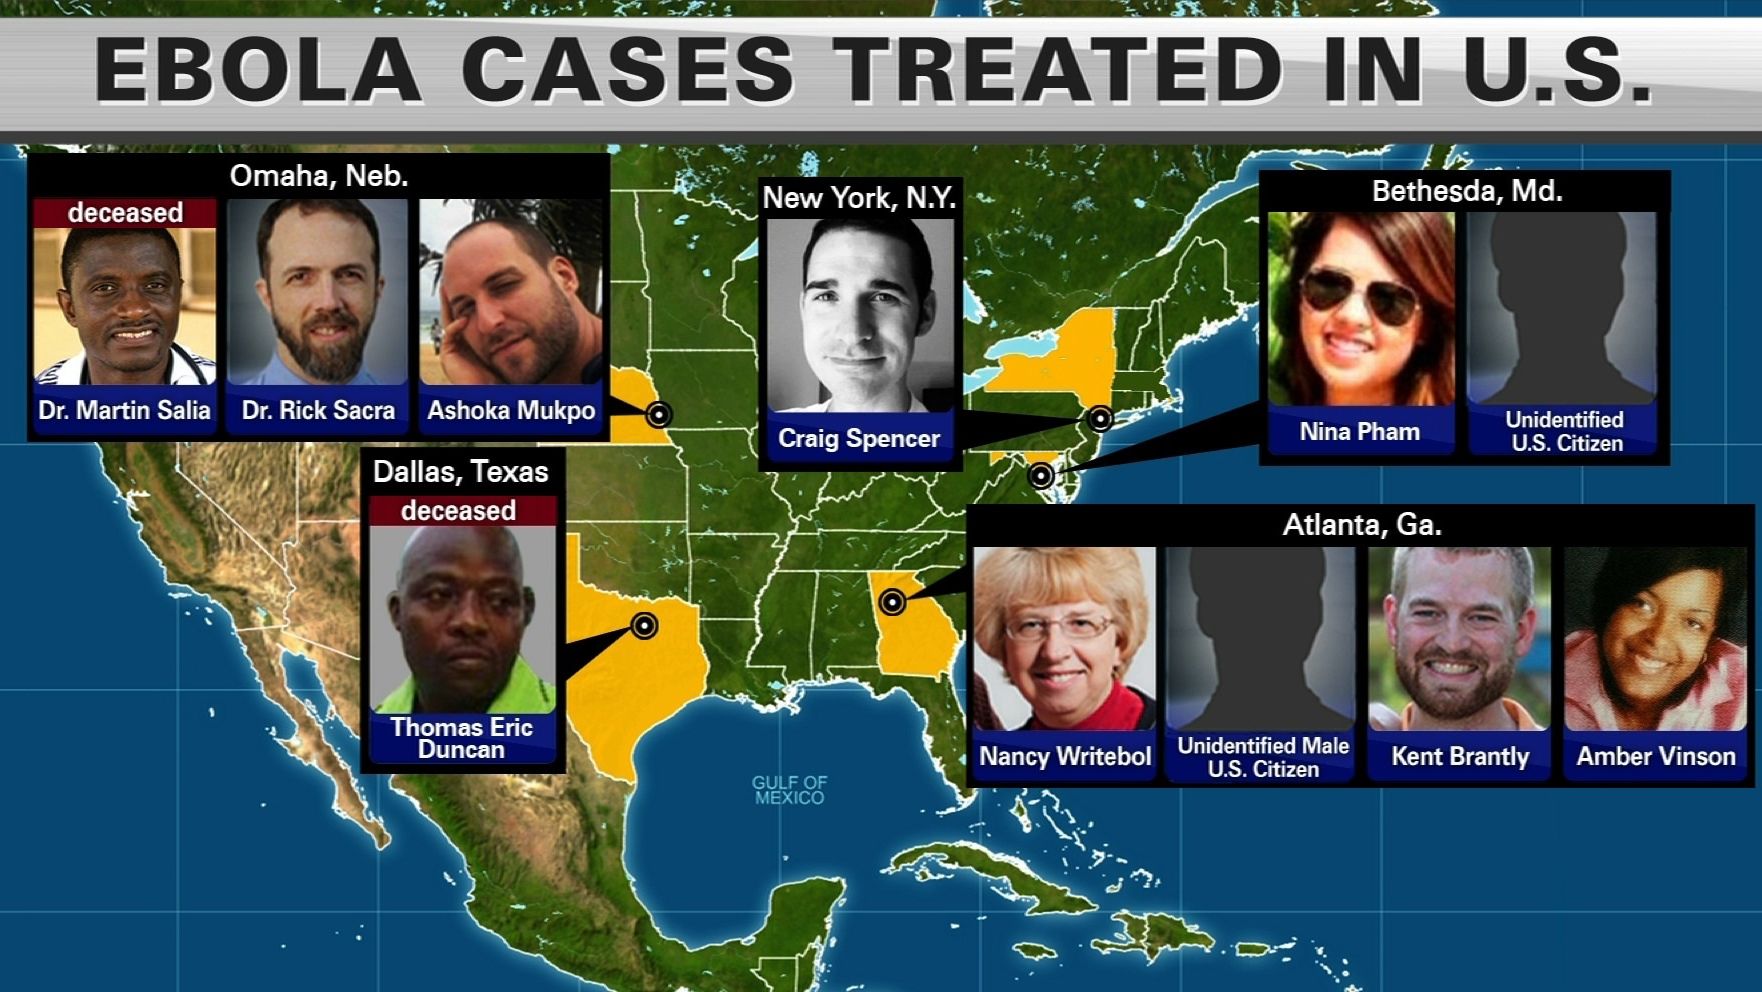 While another American is treated for Ebola, 11 of the patient's colleagues undergo monitoring.